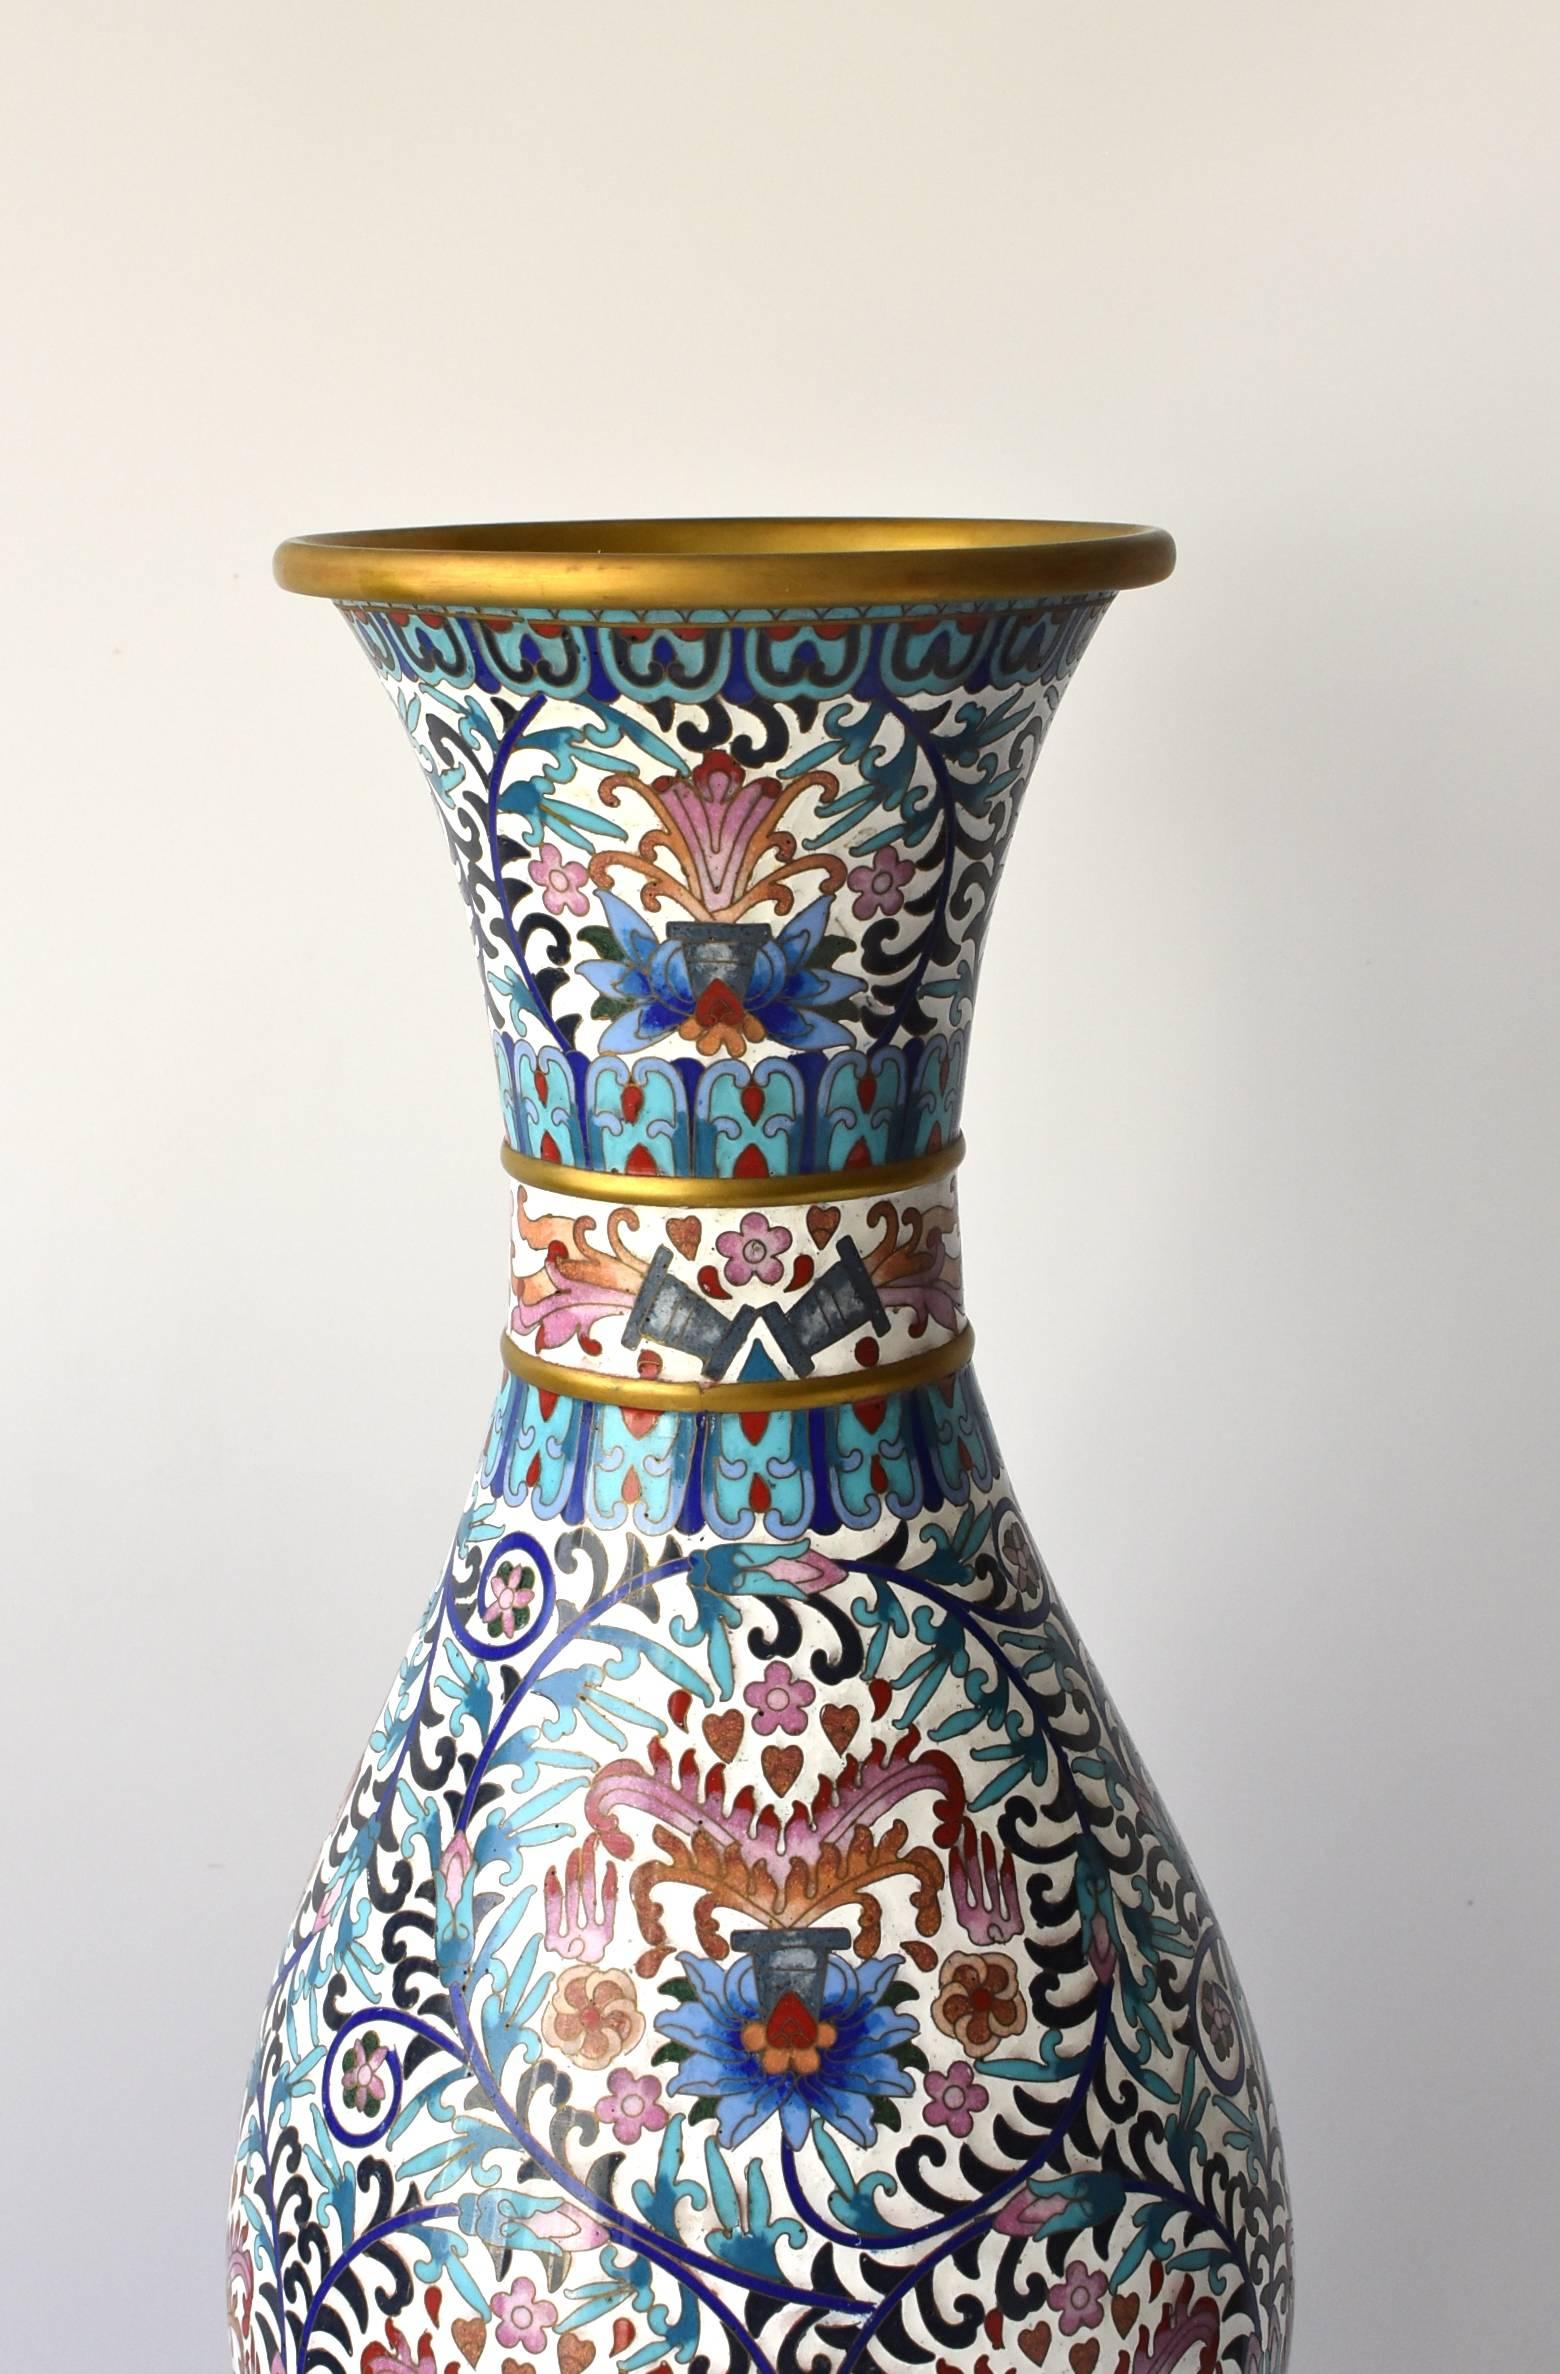 An extra large, tall cloisonné vase. The Cloisonné vase comprises in excess of 10 splendid colors. The overall theme is the full blossoms of peonies, which symbolize great prosperity. Other auspicious symbols include citrons for blessings, lotuses